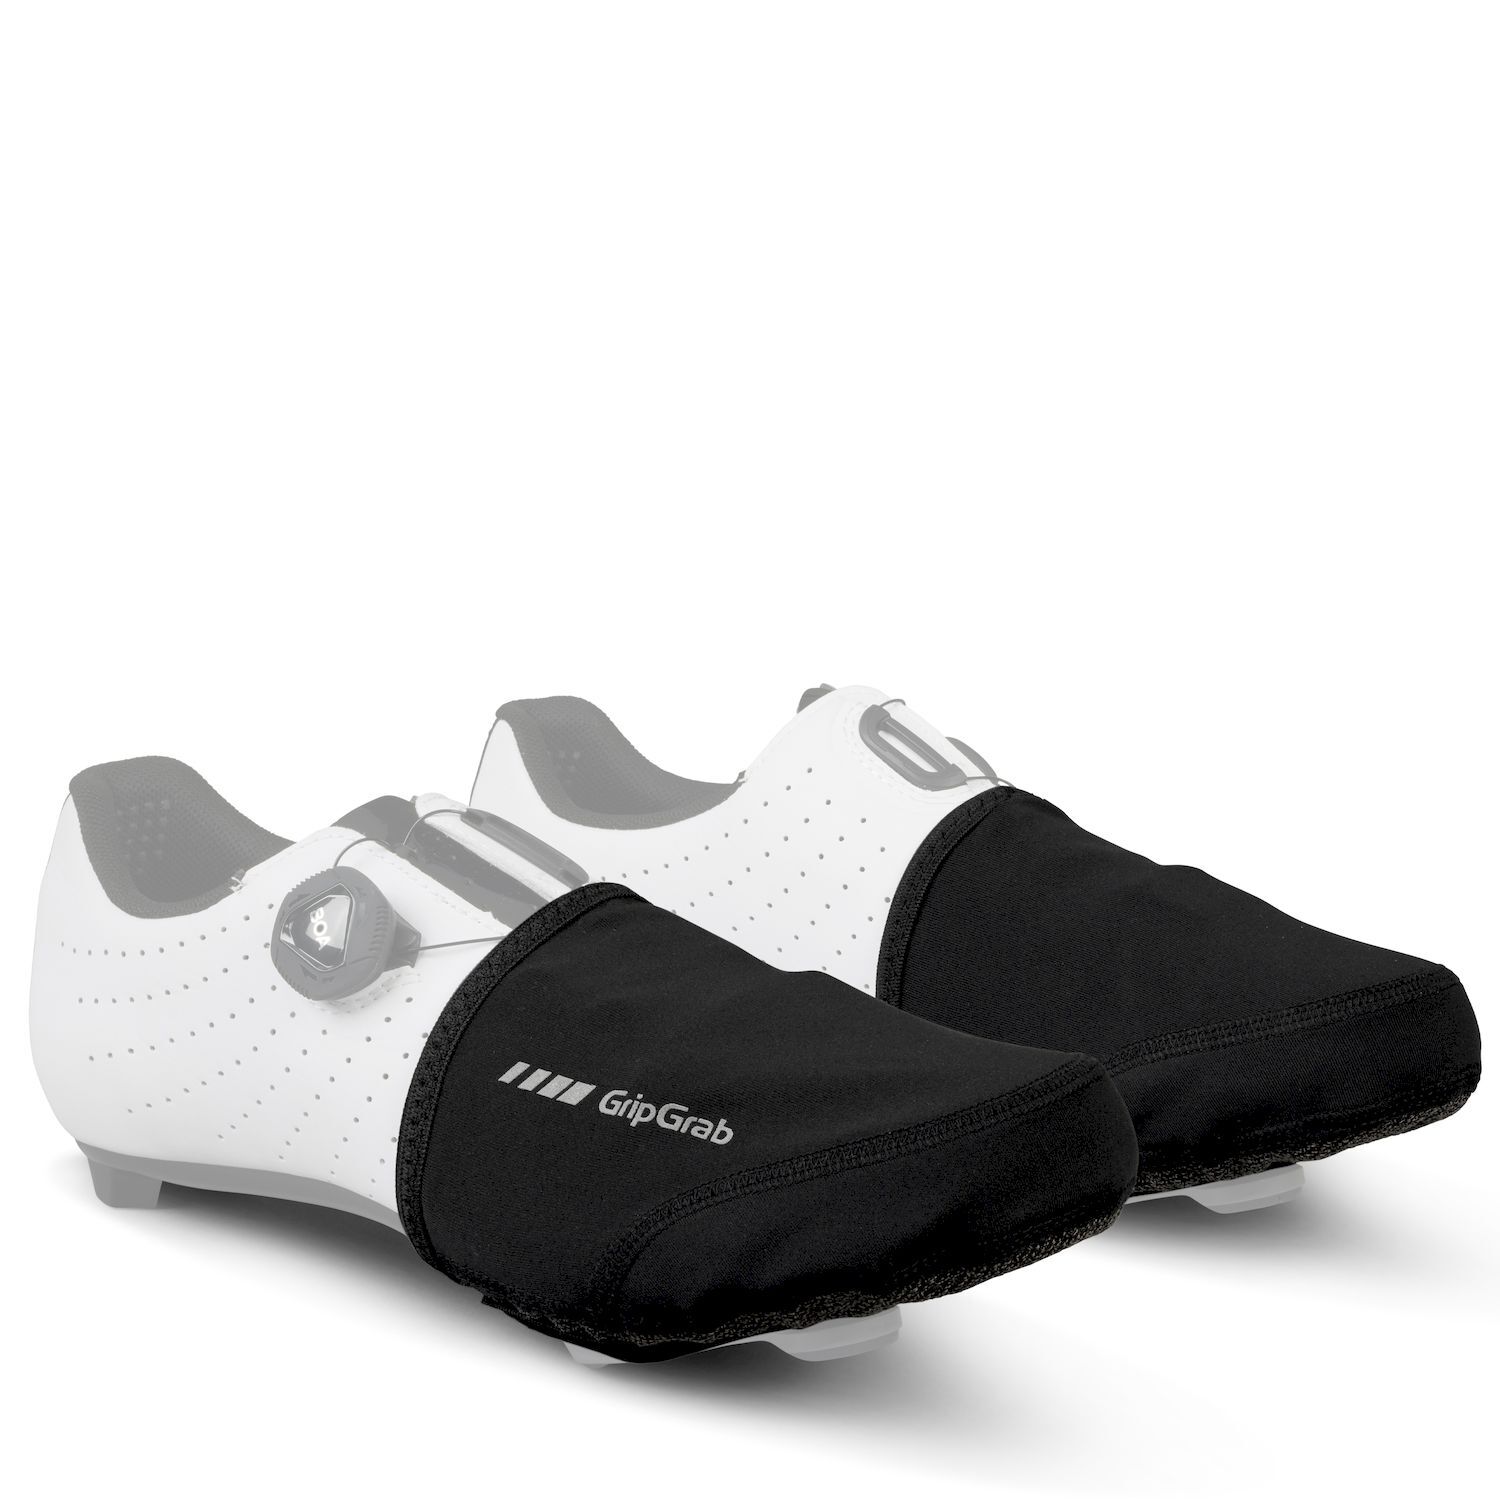 GripGrab Windproof Toe Covers - Sur-chaussures vélo